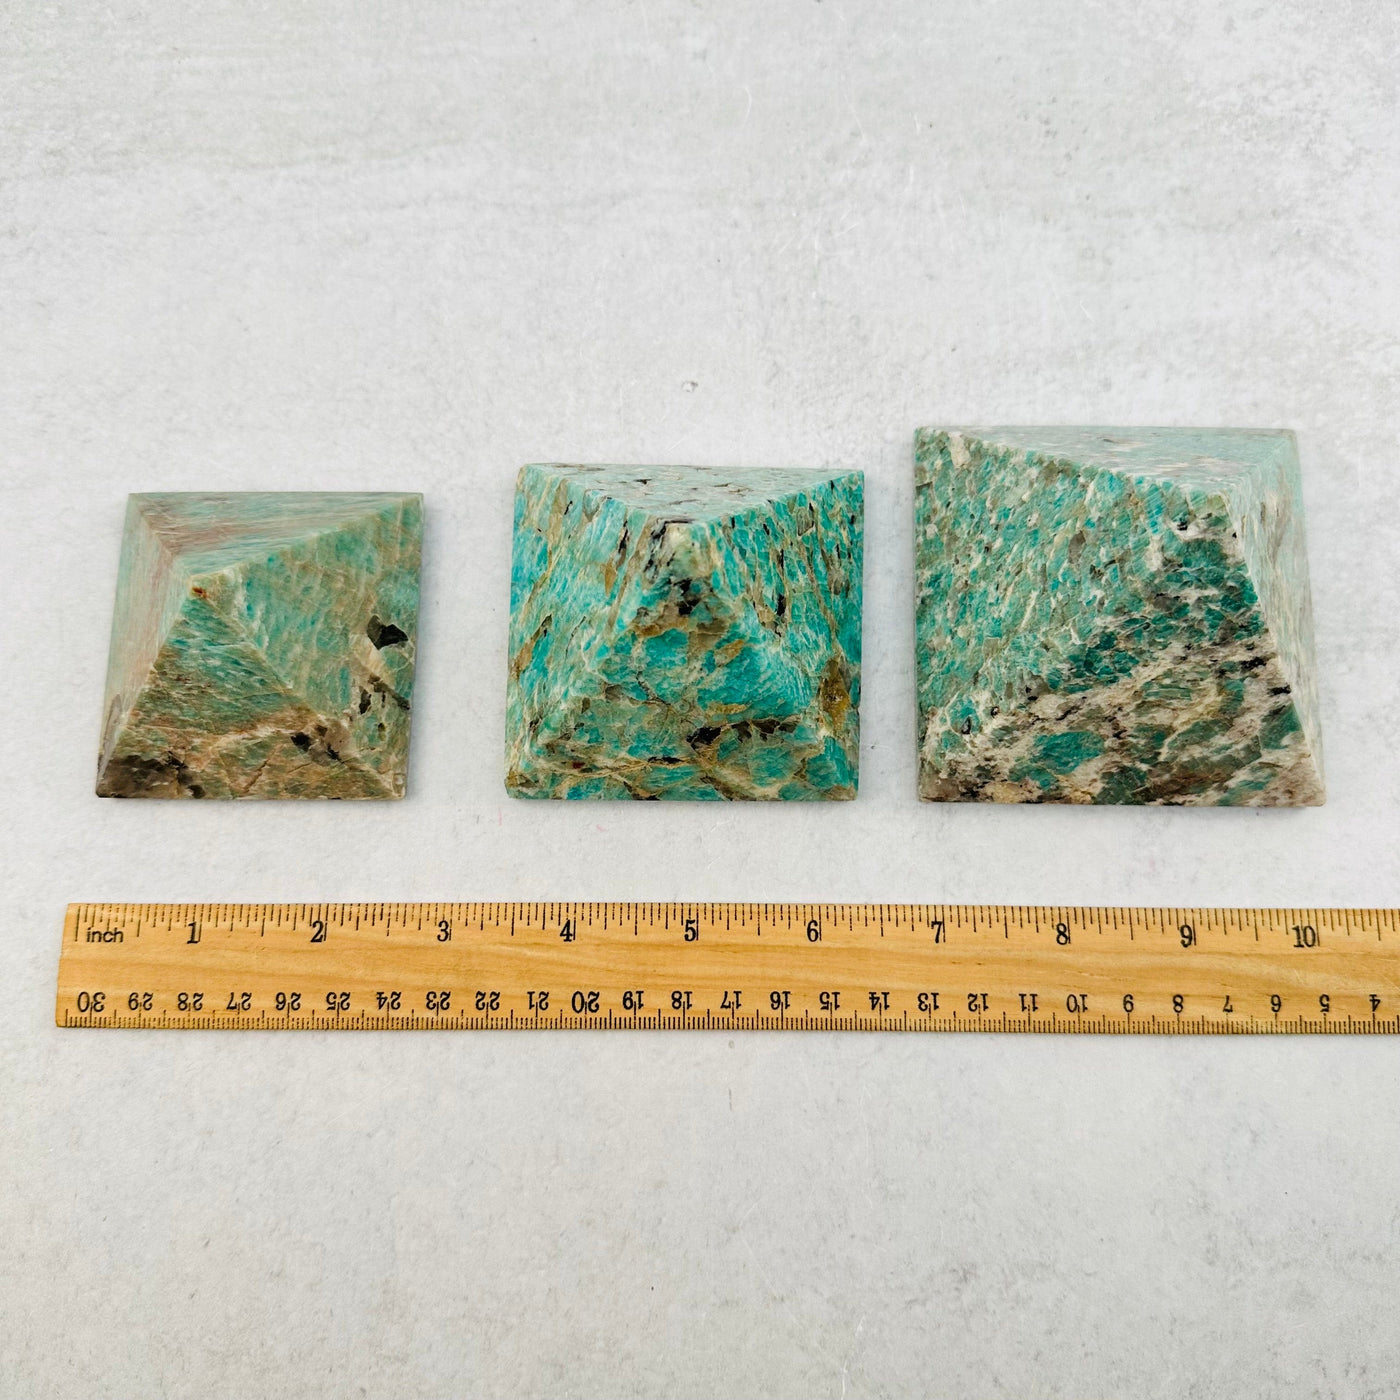 Amazonite Crystal Pyramids - By Weight